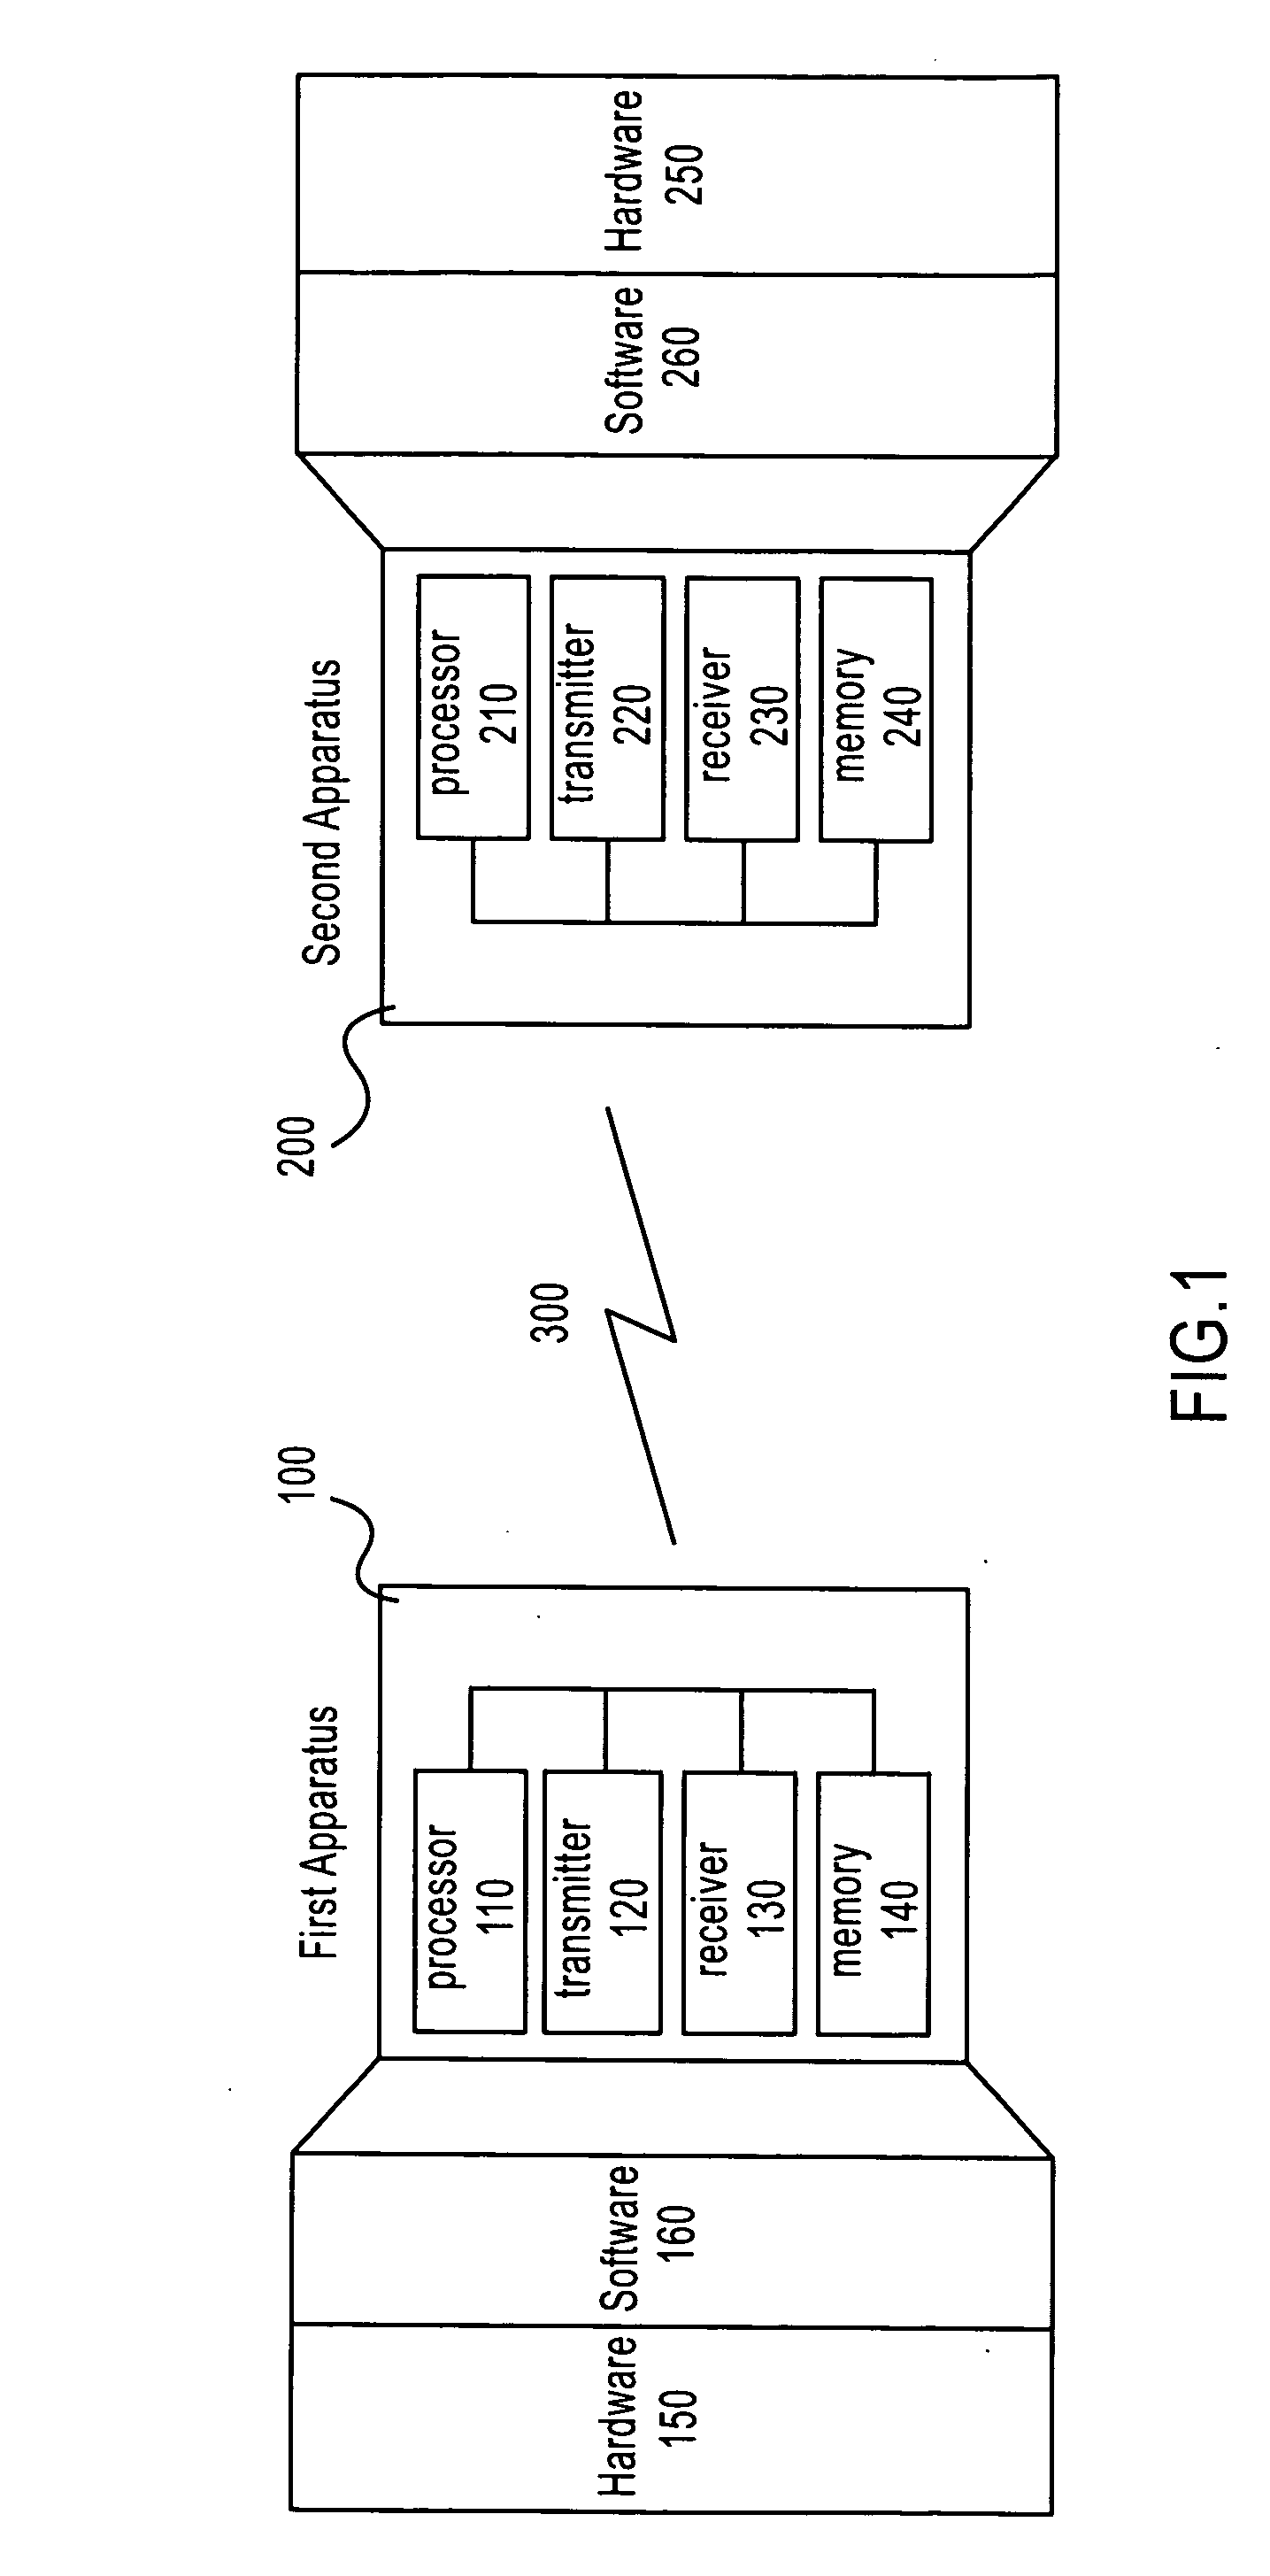 Extension of power headroom reporting and trigger conditions